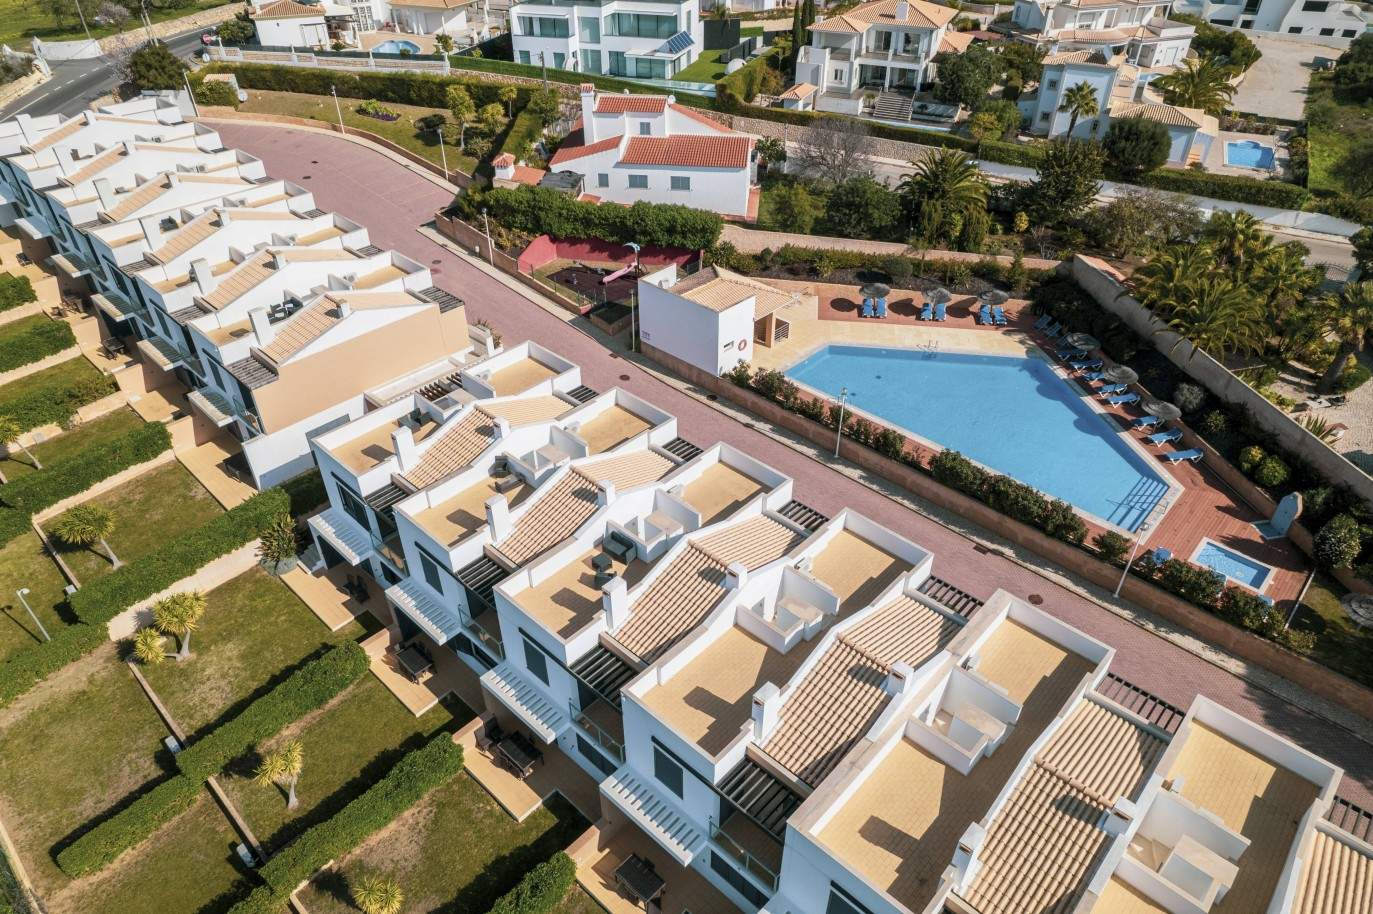 3 bedroom townhouses with sea view, for sale in Albufeira, Algarve_199450